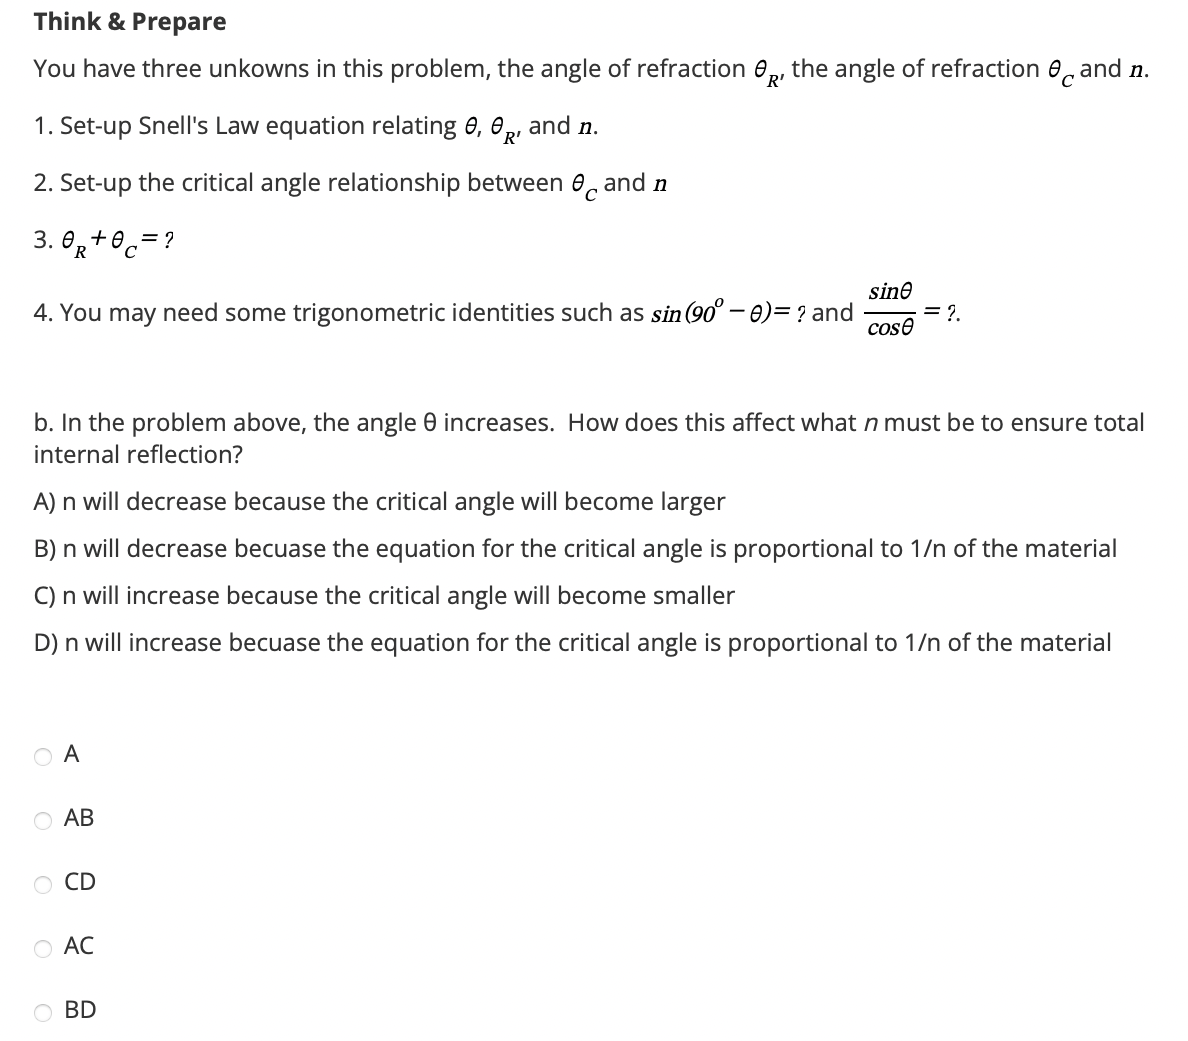 Think & Prepare
R'
You have three unkowns in this problem, the angle of refraction R, the angle of refraction and n.
and n.
1. Set-up Snell's Law equation relating e, R
2. Set-up the critical angle relationship between 0 and n
3.0+0
0 = ?
R
4. You may need some trigonometric identities such as sin (90° - 0) = ? and
sine
= 2.
cose
b. In the problem above, the angle e increases. How does this affect what n must be to ensure total
internal reflection?
A) n will decrease because the critical angle will become larger
B) n will decrease becuase the equation for the critical angle is proportional to 1/n of the material
C) n will increase because the critical angle will become smaller
D) n will increase becuase the equation for the critical angle is proportional to 1/n of the material
OA
○ AB
CD
○ AC
○ BD